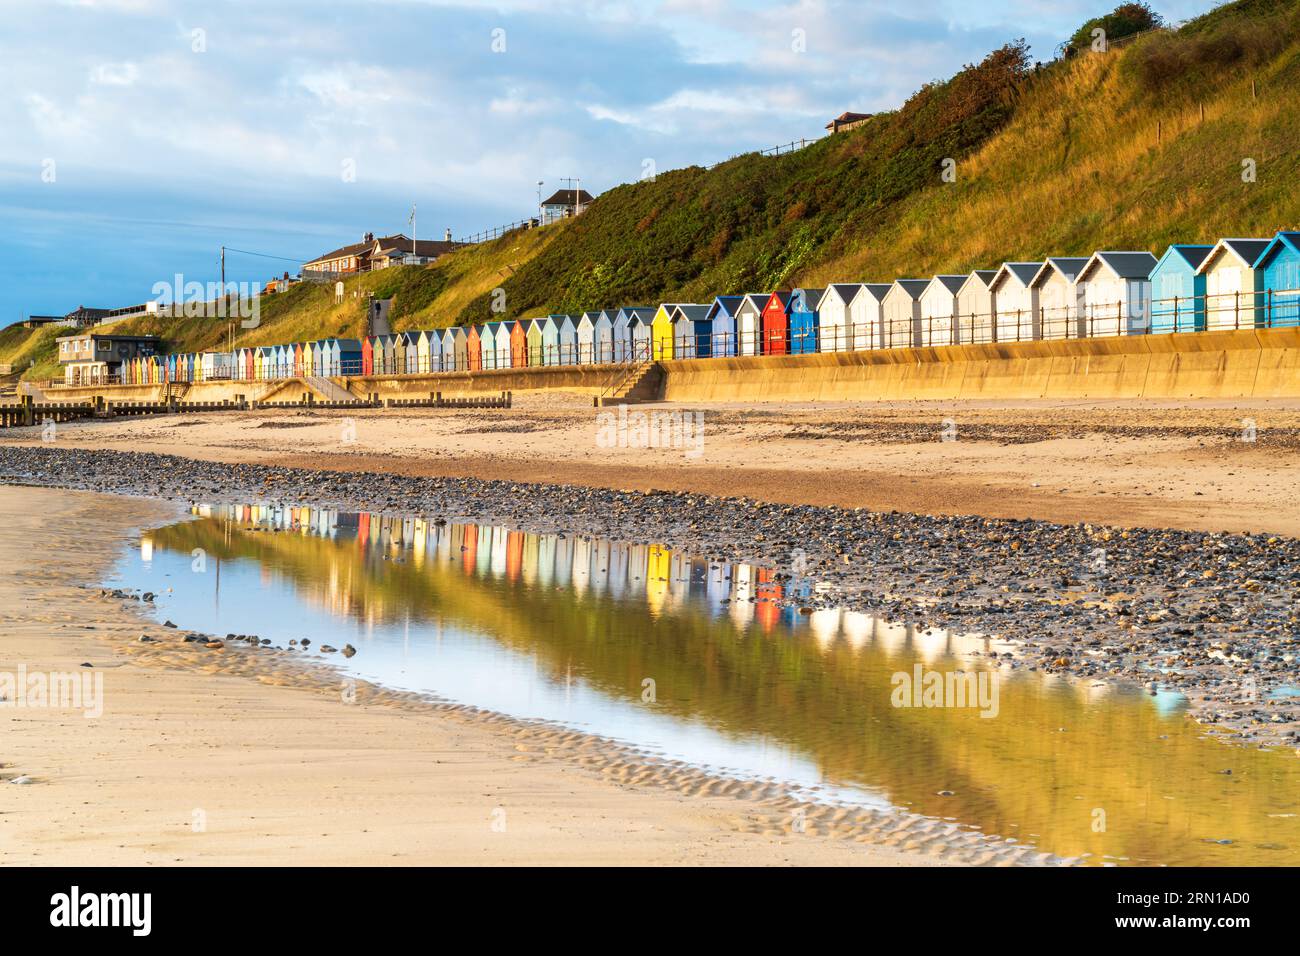 Relections of the beach huts on the beach at Mundesley in North Norfolk, UK at Sunrise Stock Photo